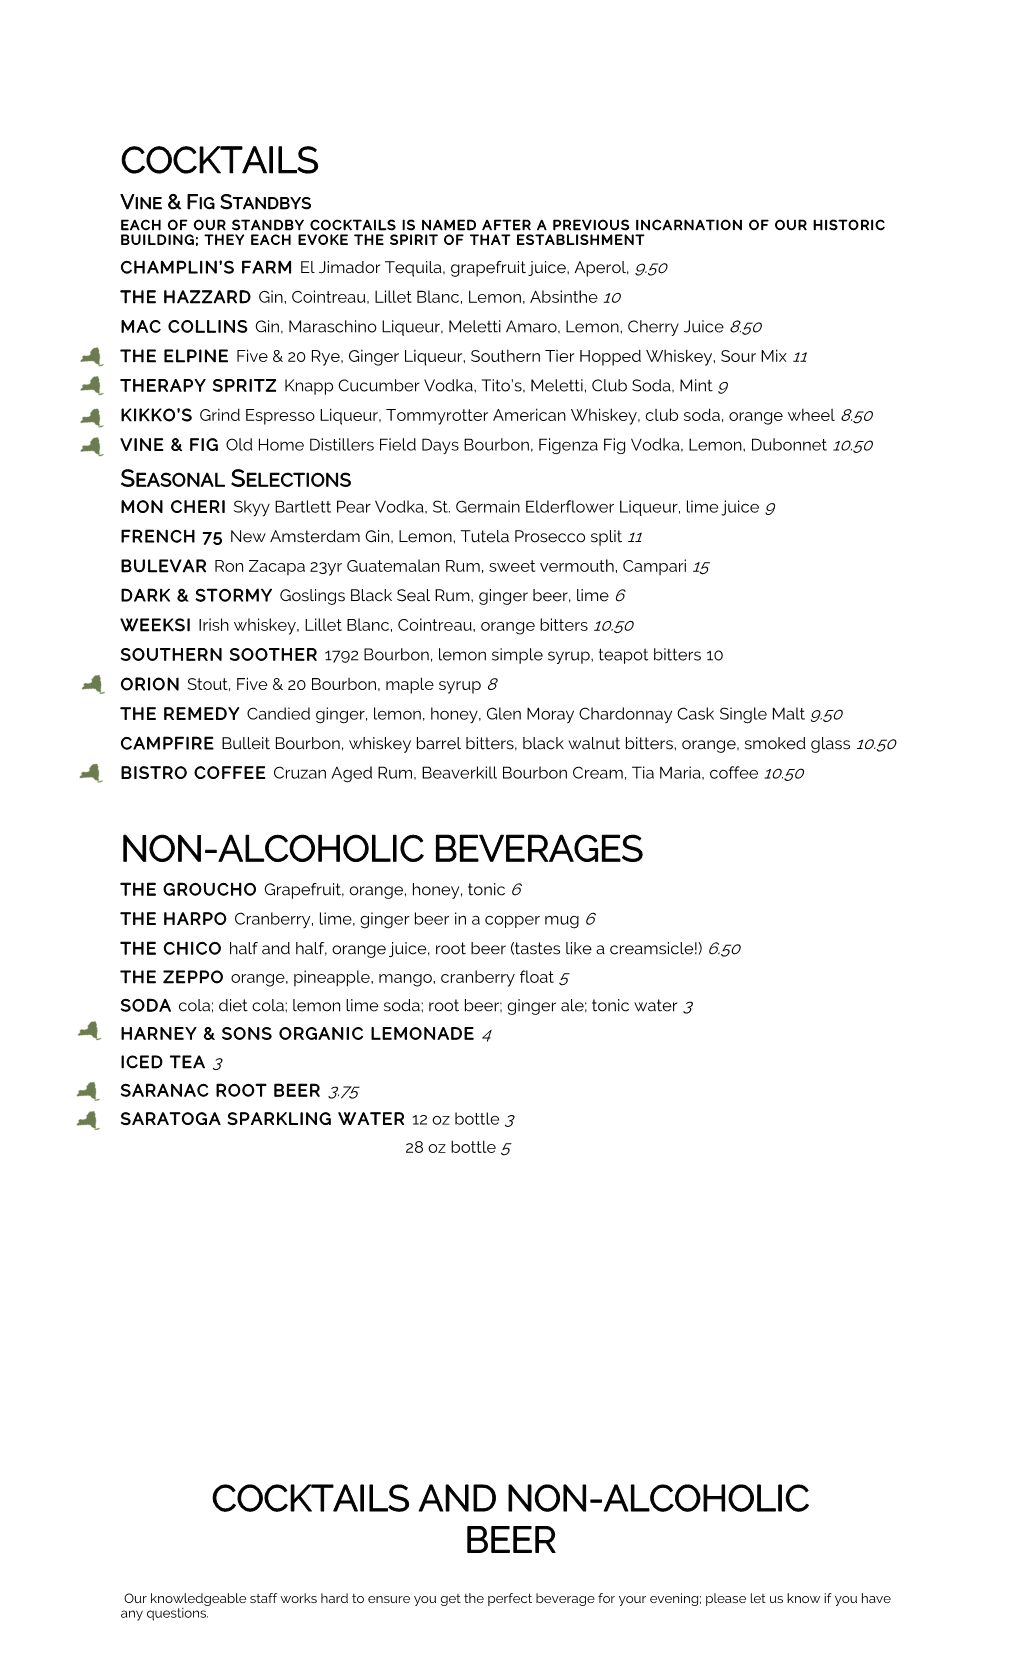 Cocktails Non-Alcoholic Beverages Beer